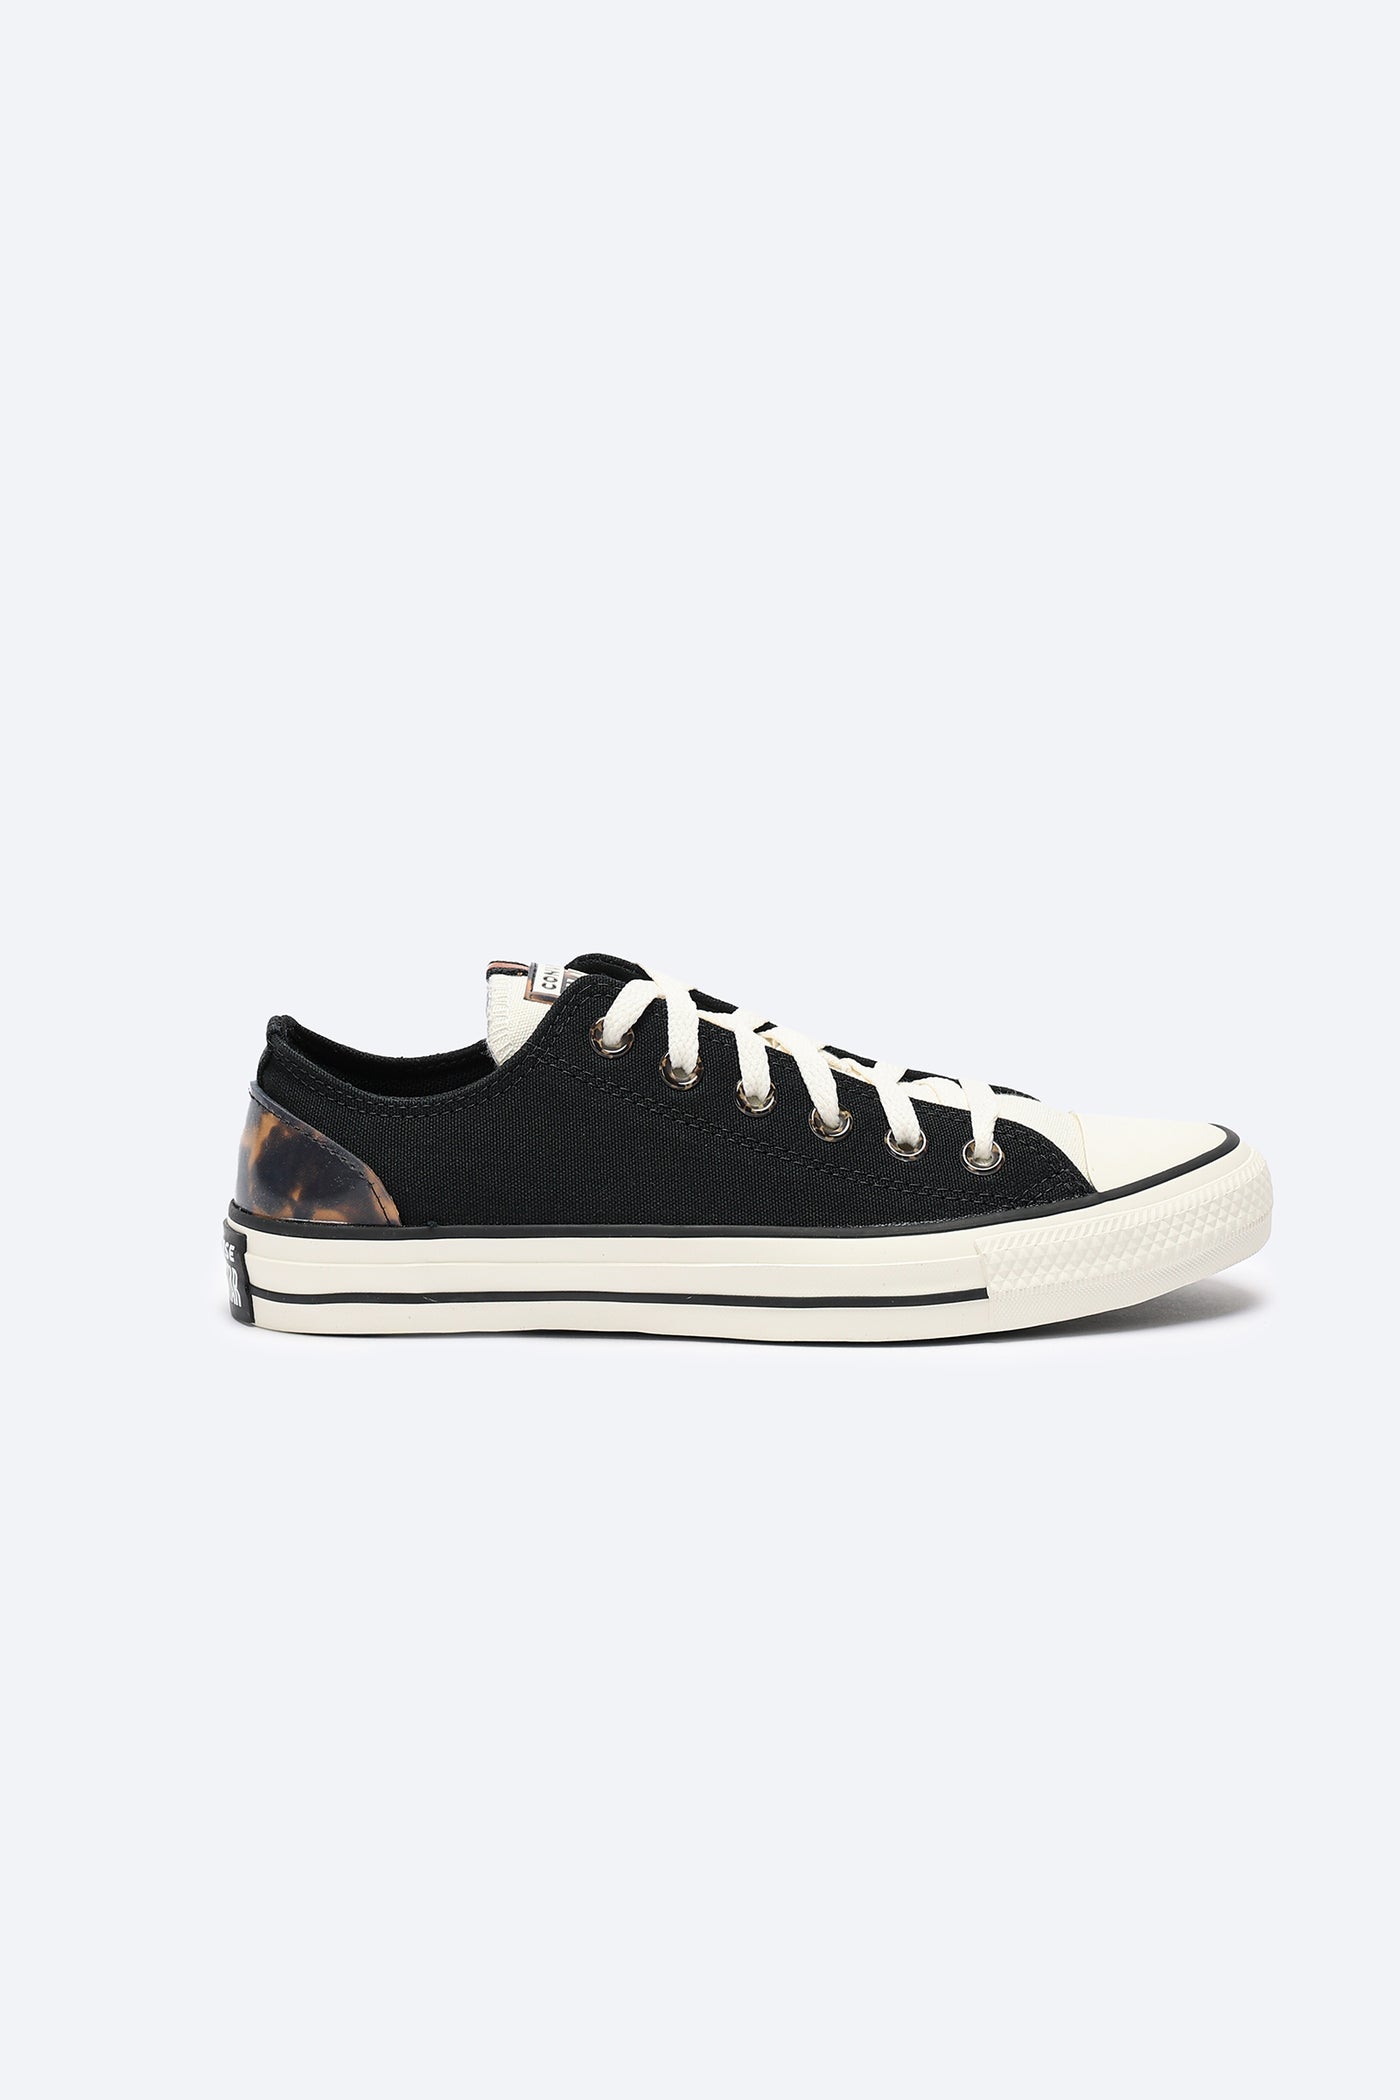 Sneakers - Chuck Taylor All Star - Back Patterned